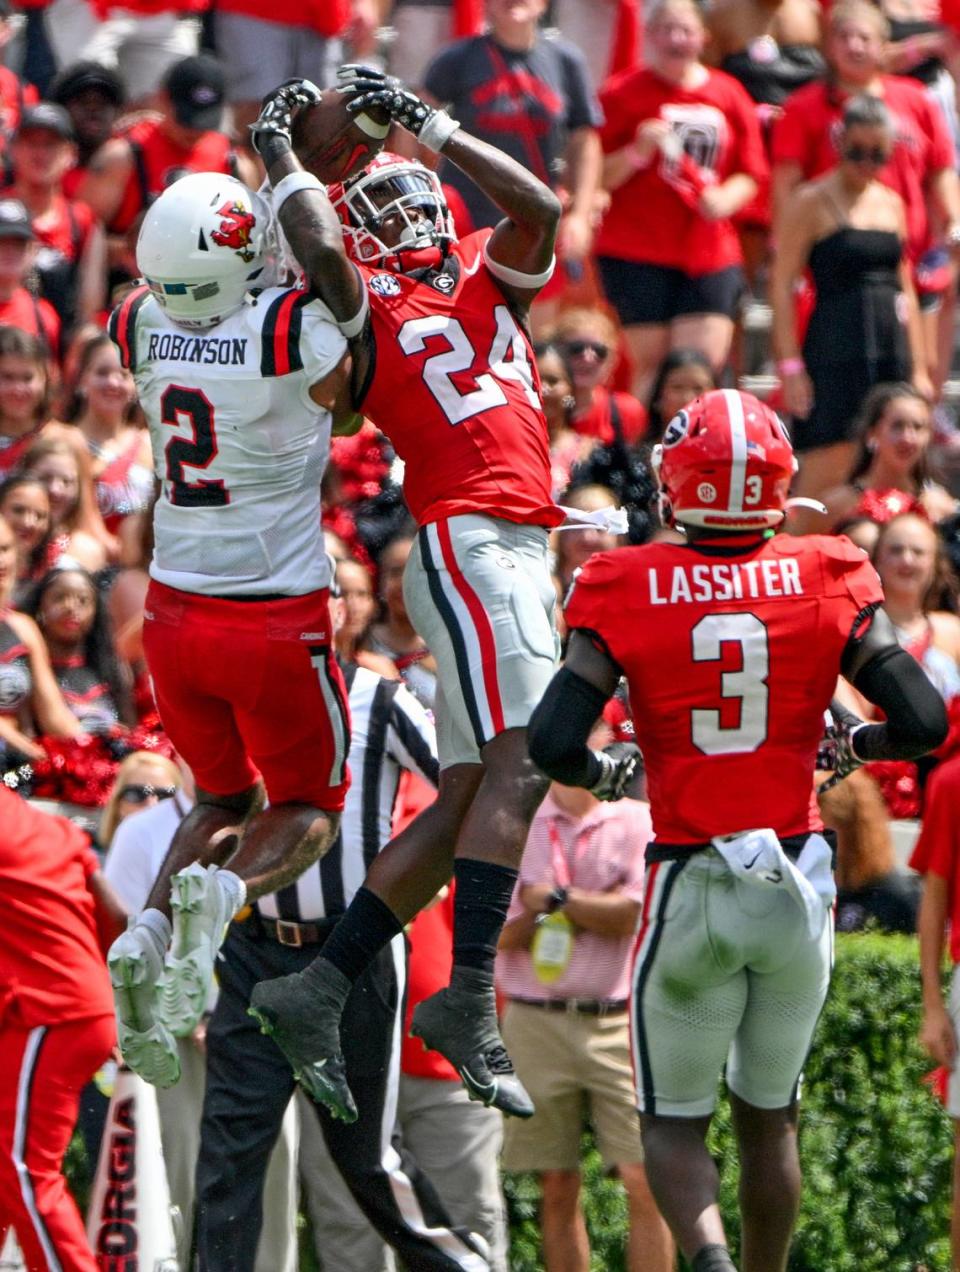 Georgia defensive back Malaki Starks (24) hauls in an interception during the Bulldogs’ victory over Ball State Saturday in Athens.